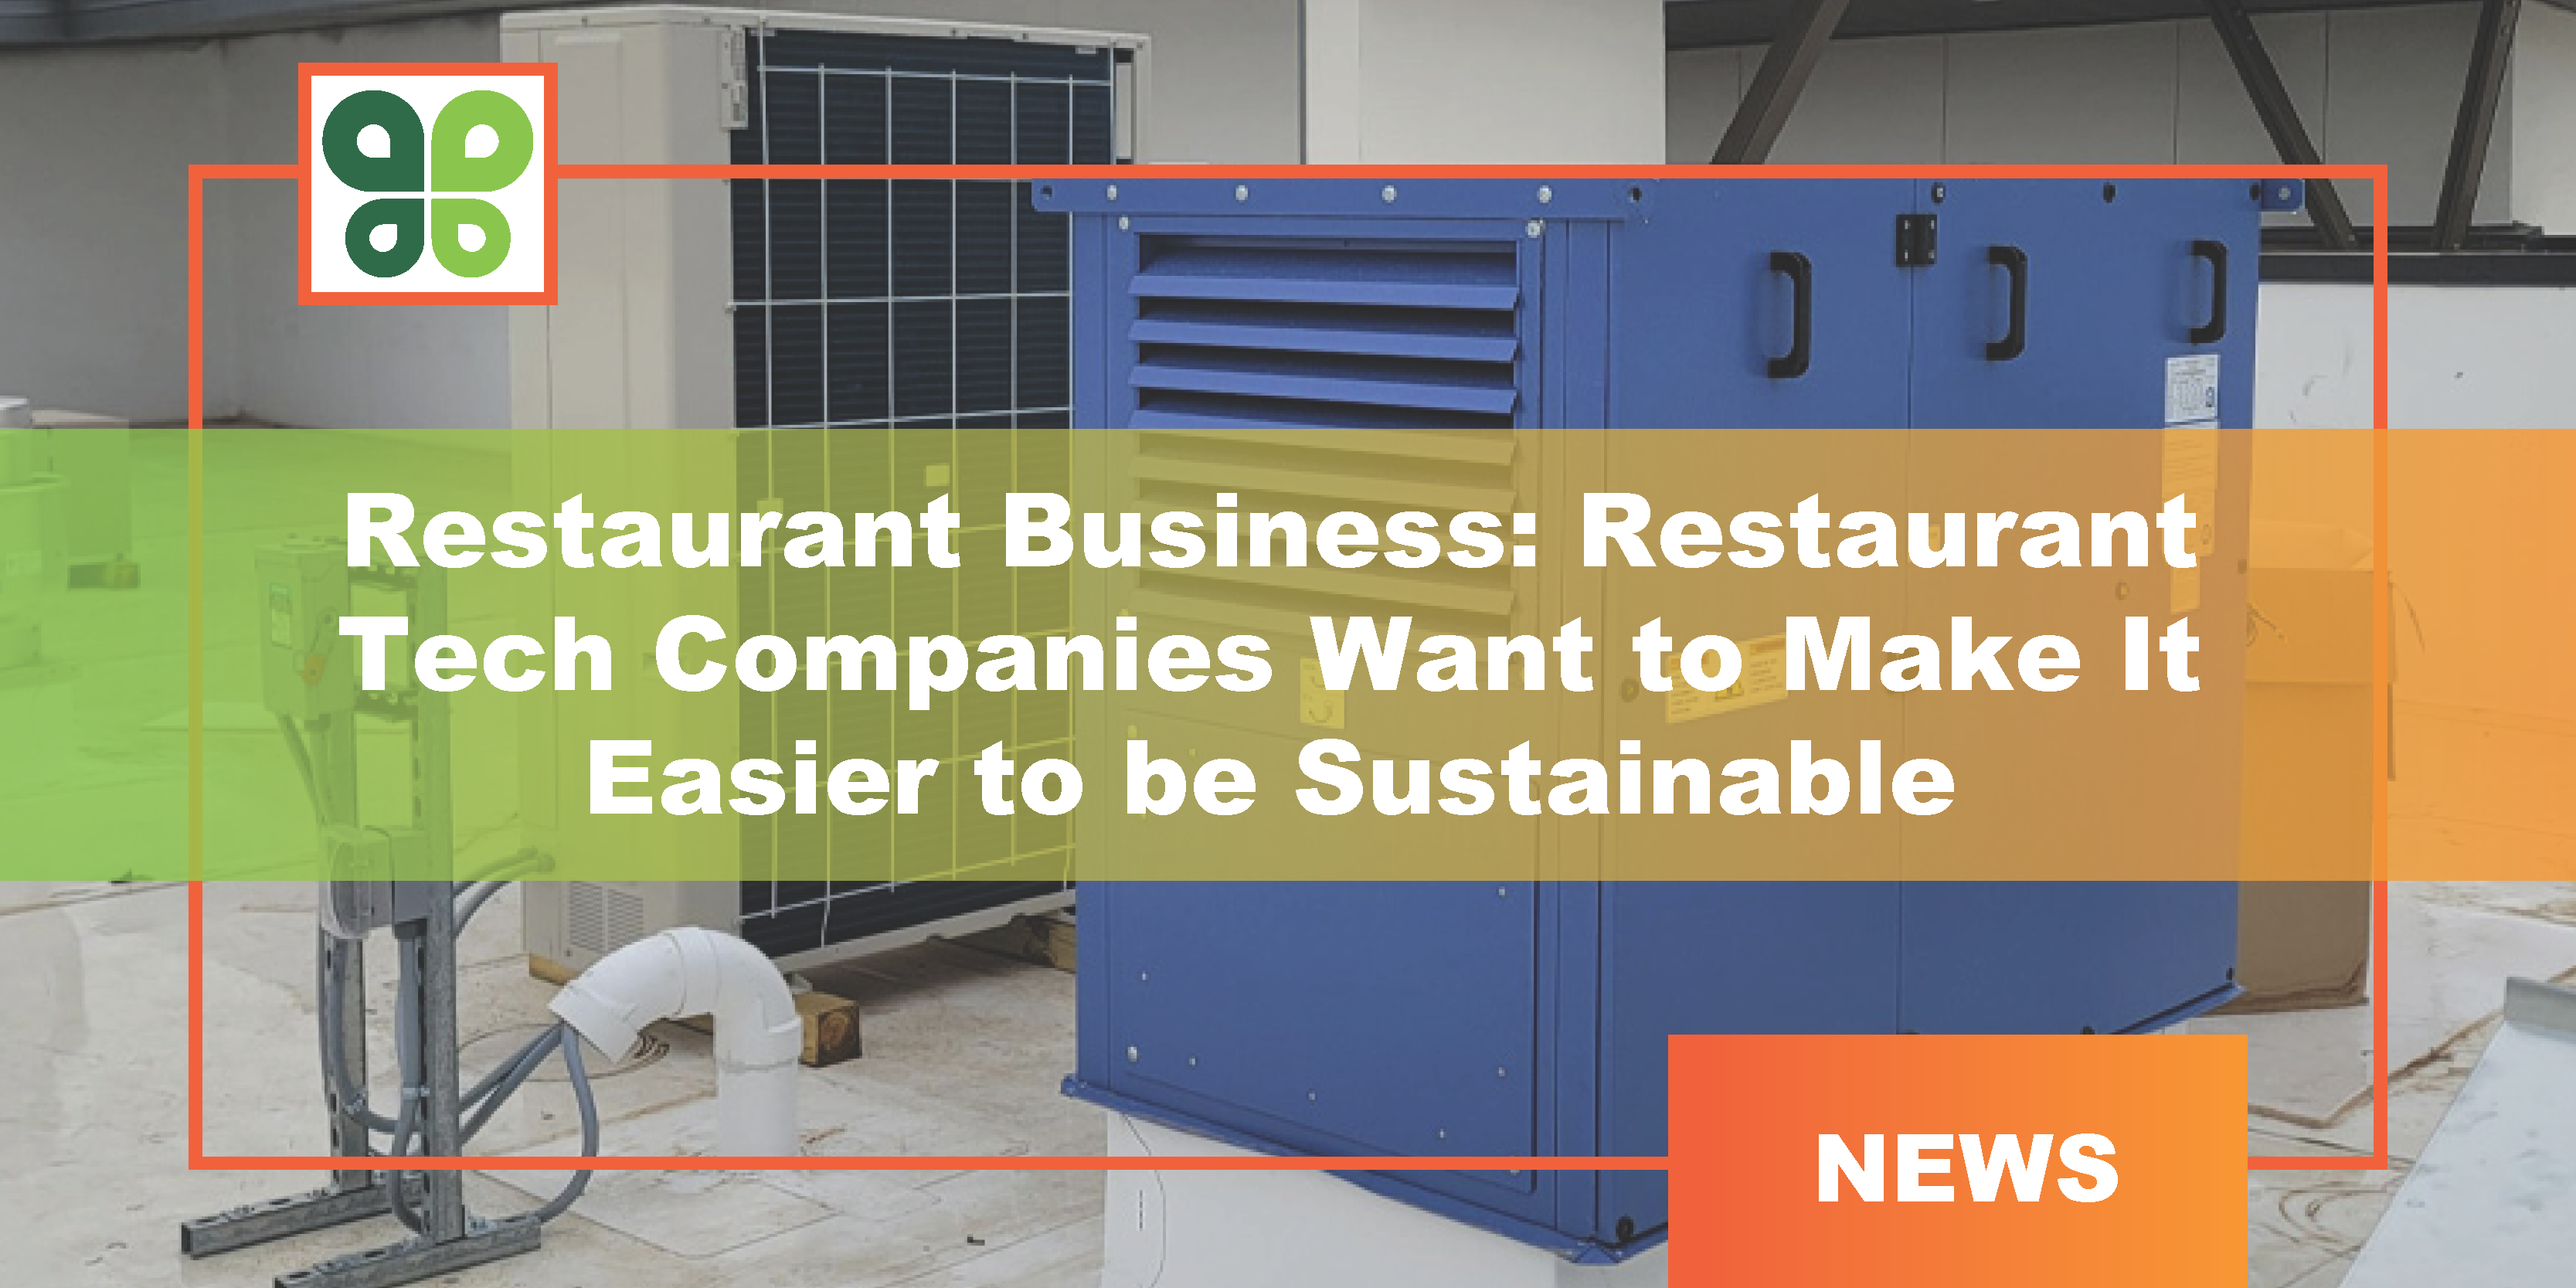 Restaurant Business: Restaurant Tech Companies Want to Make It Easier to be Sustainable